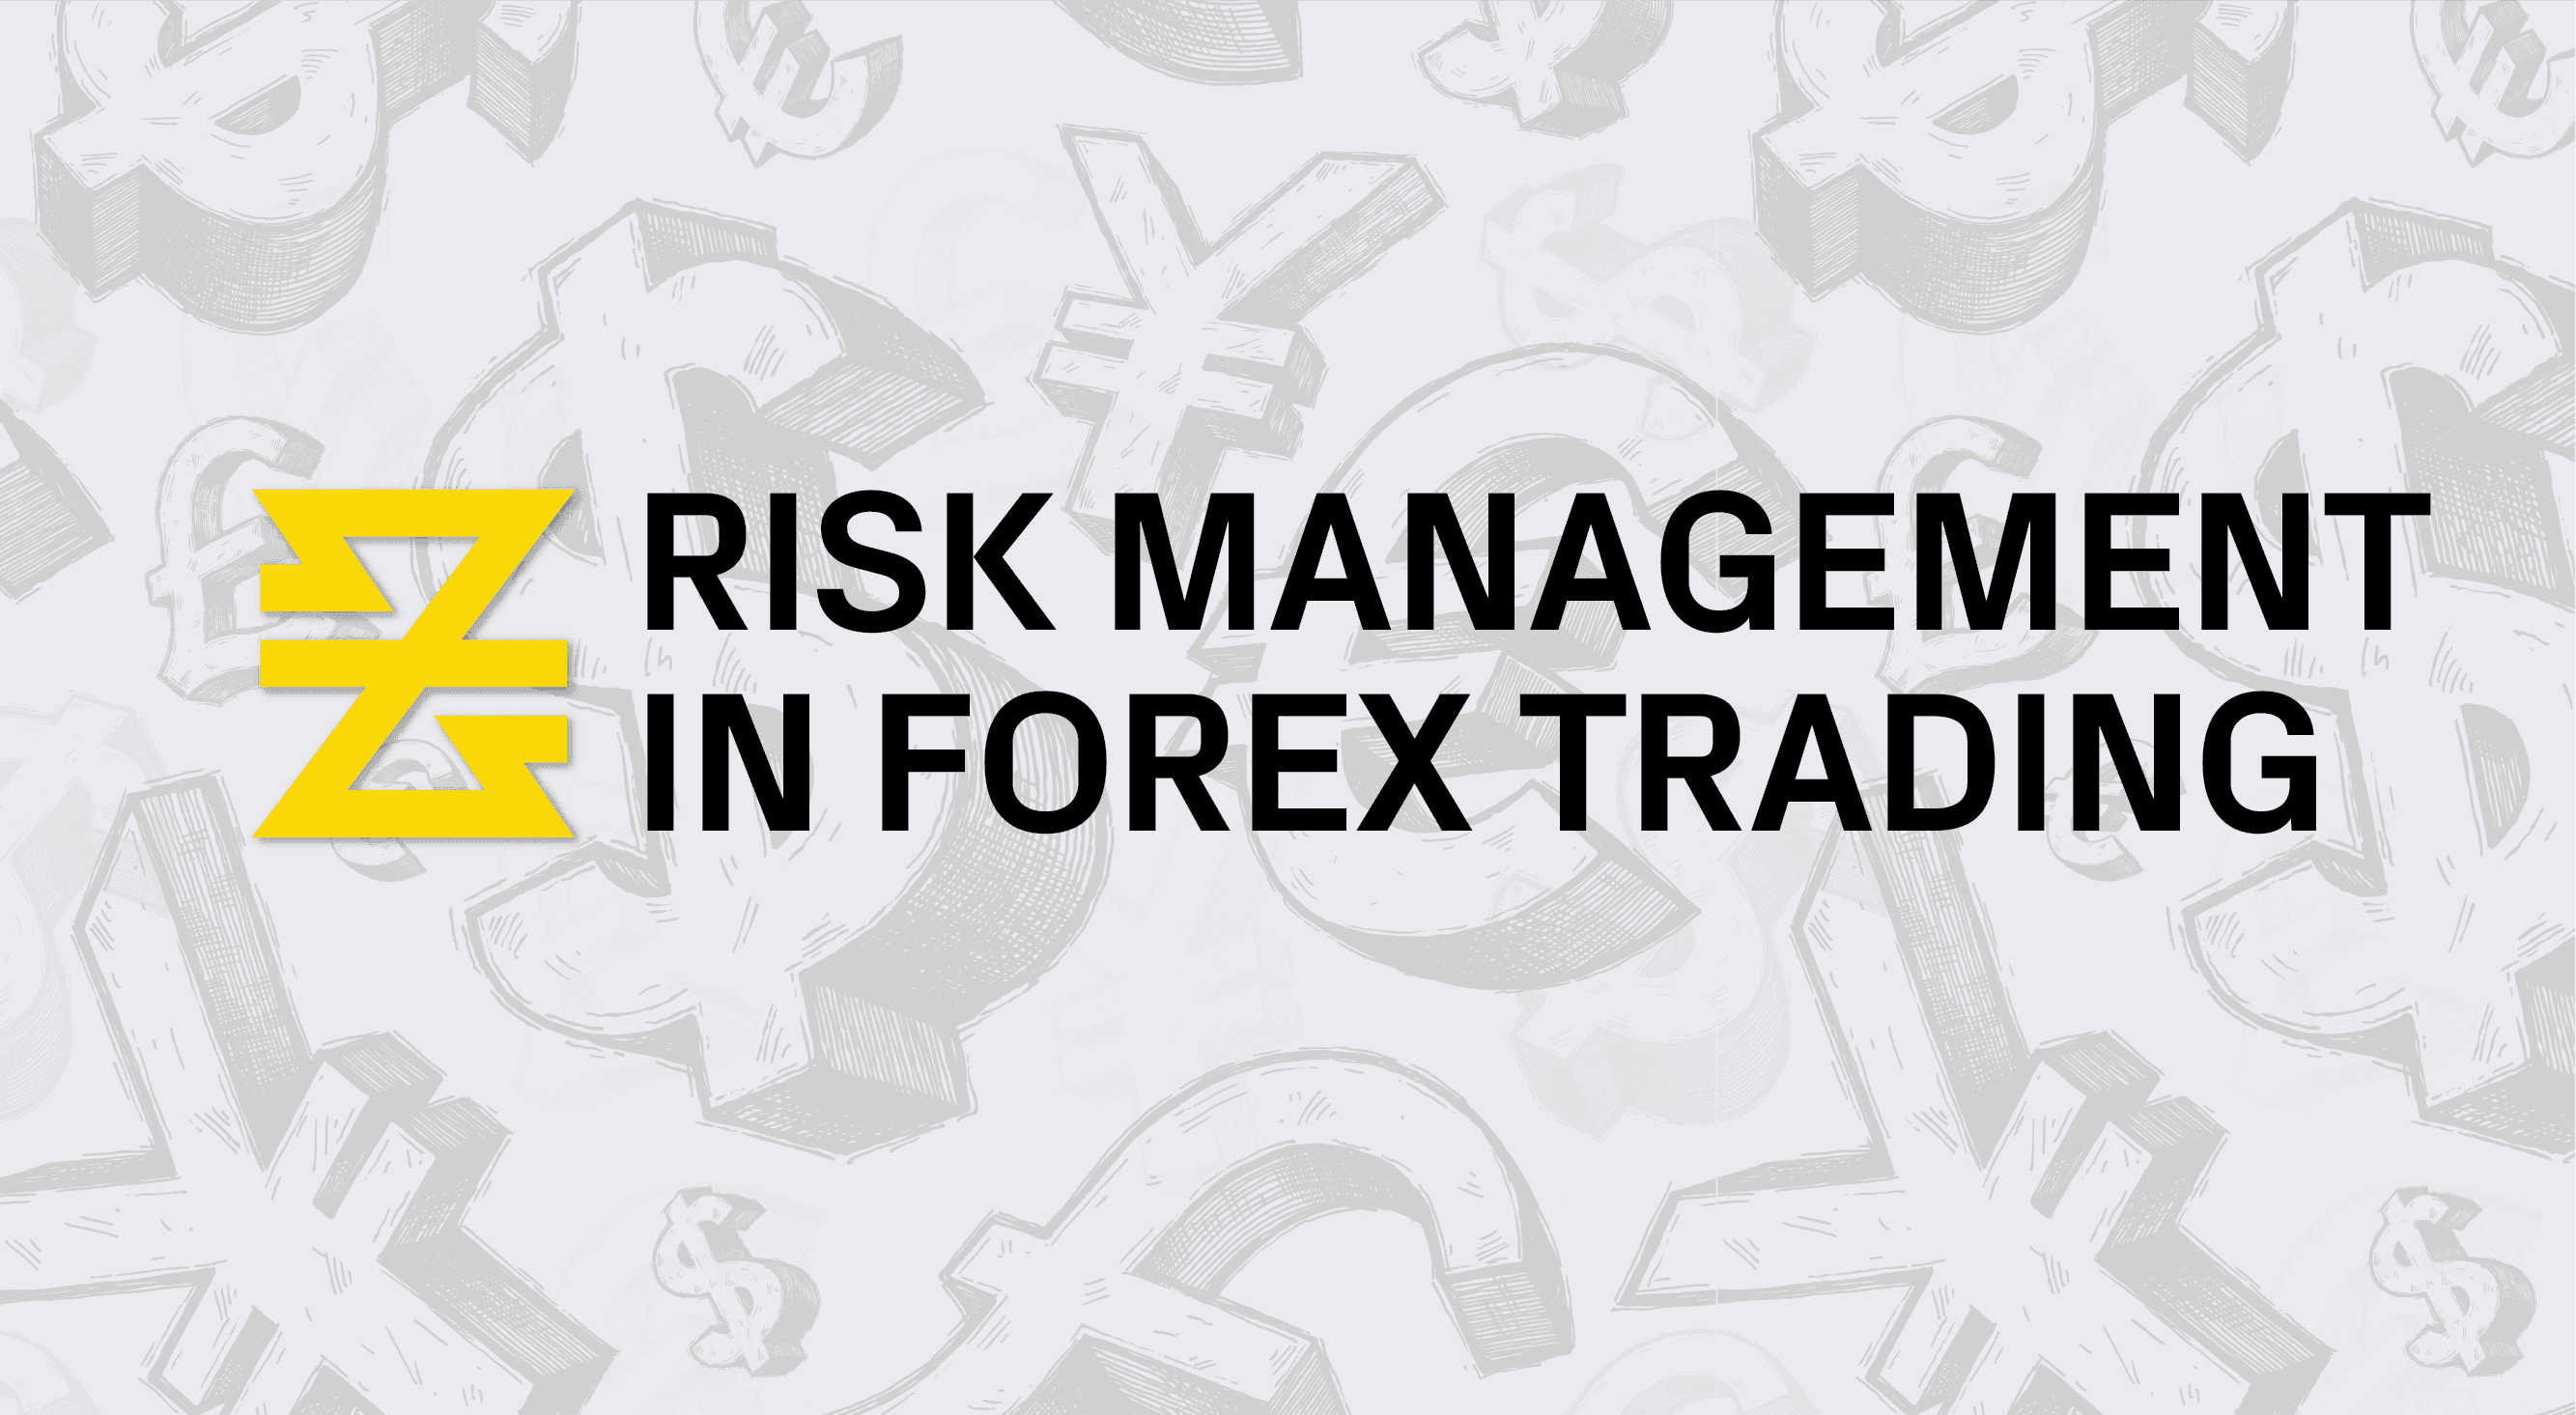 Risk Management in Forex Trading - chapter - baxia markets